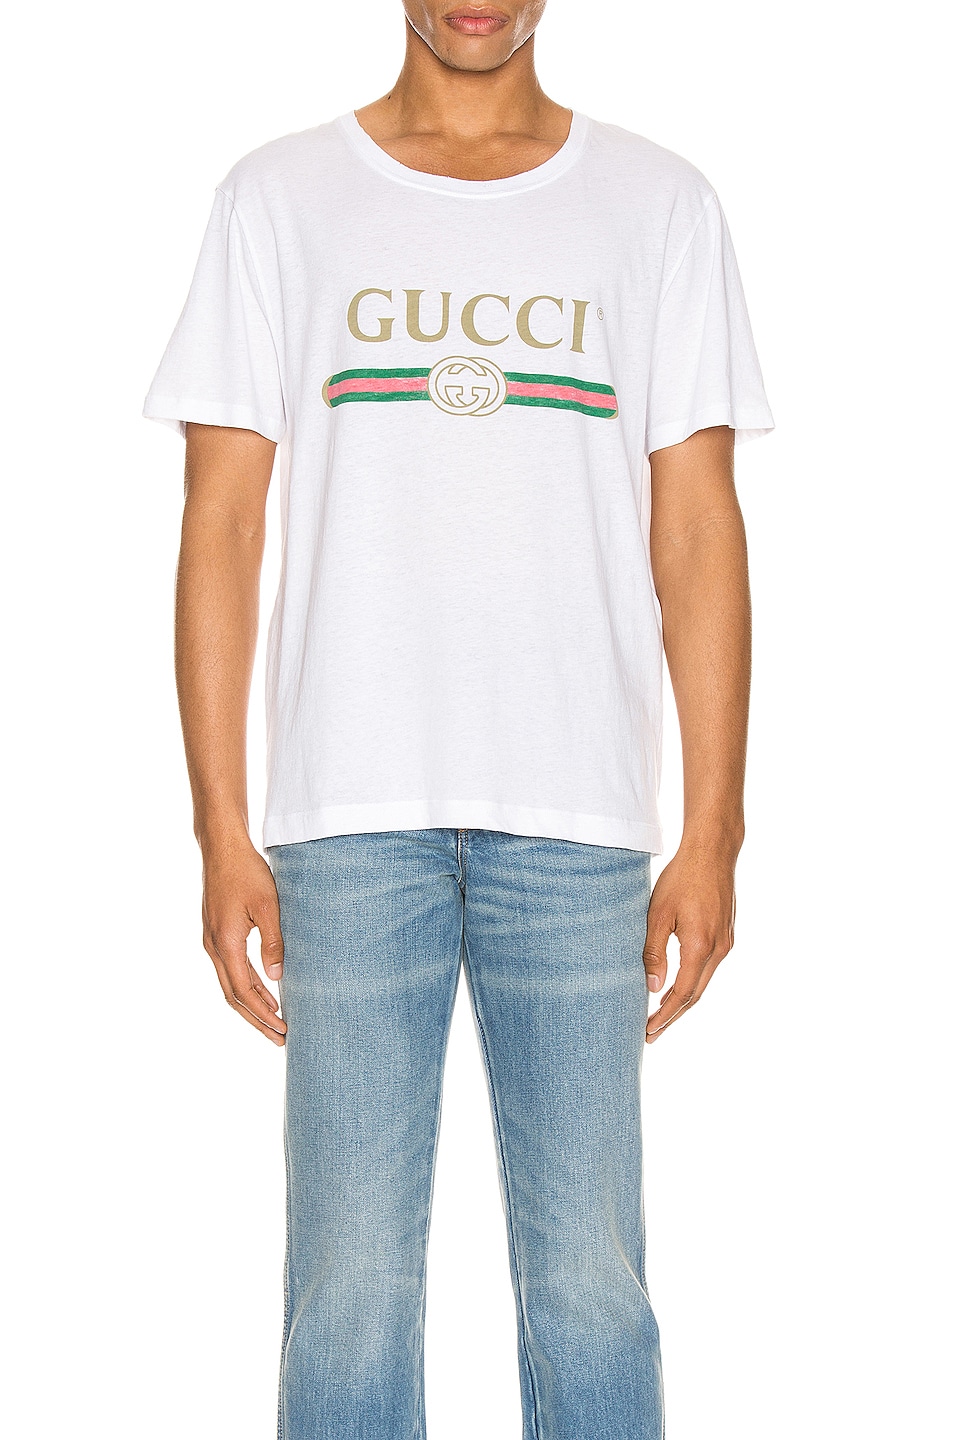 Image 1 of Gucci Logo Oversize Washed Tee in White & Green & Red & Gold